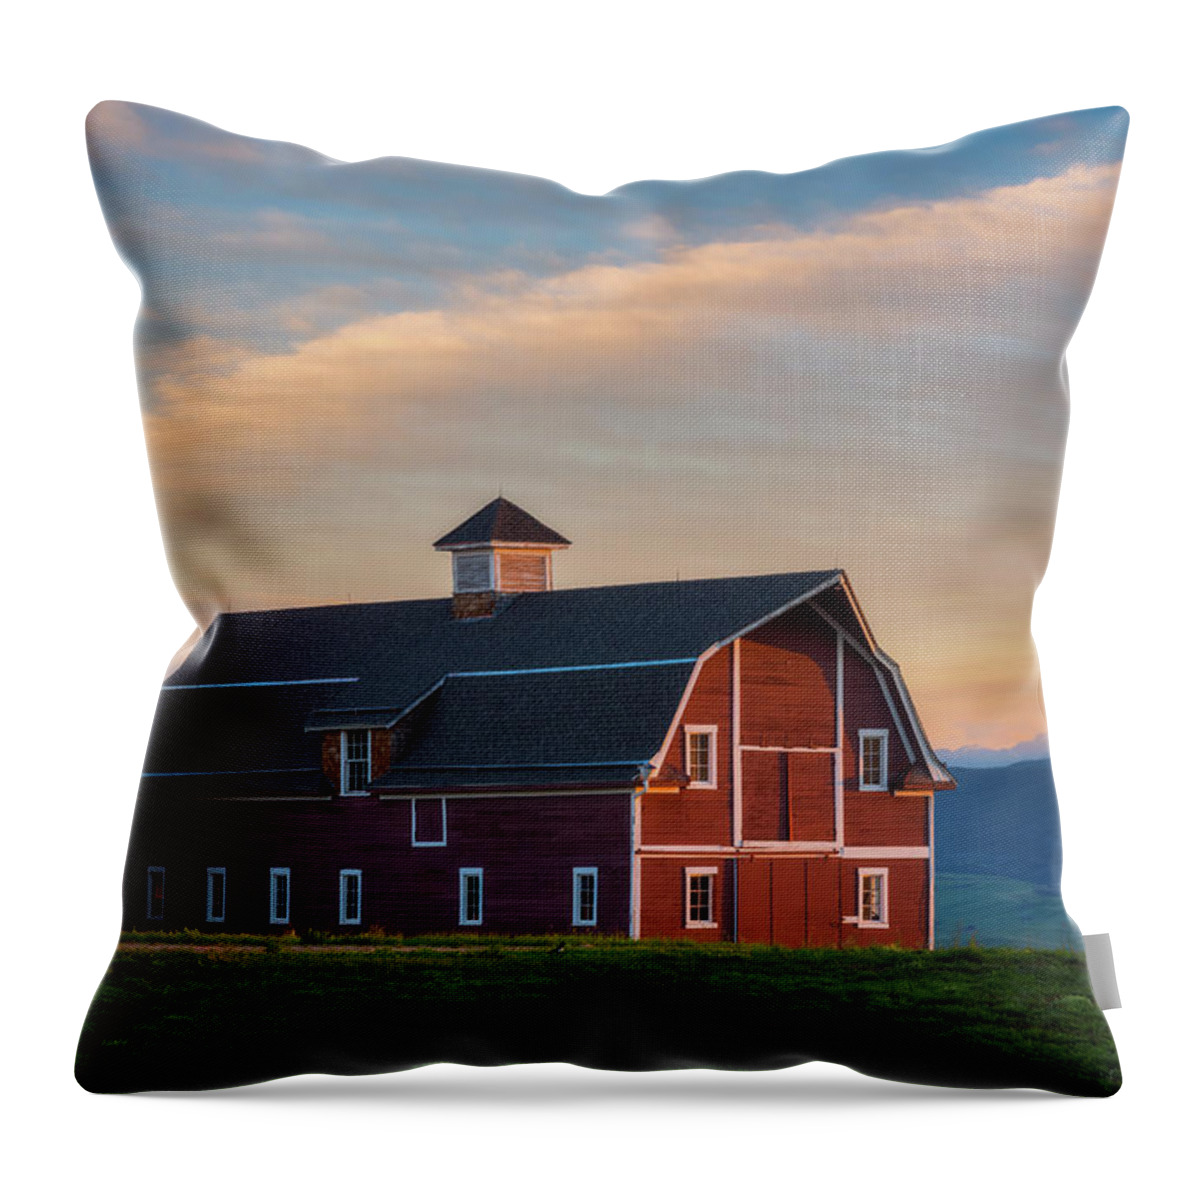 Barns Throw Pillow featuring the photograph Danny's Barn At Sunset by Darren White